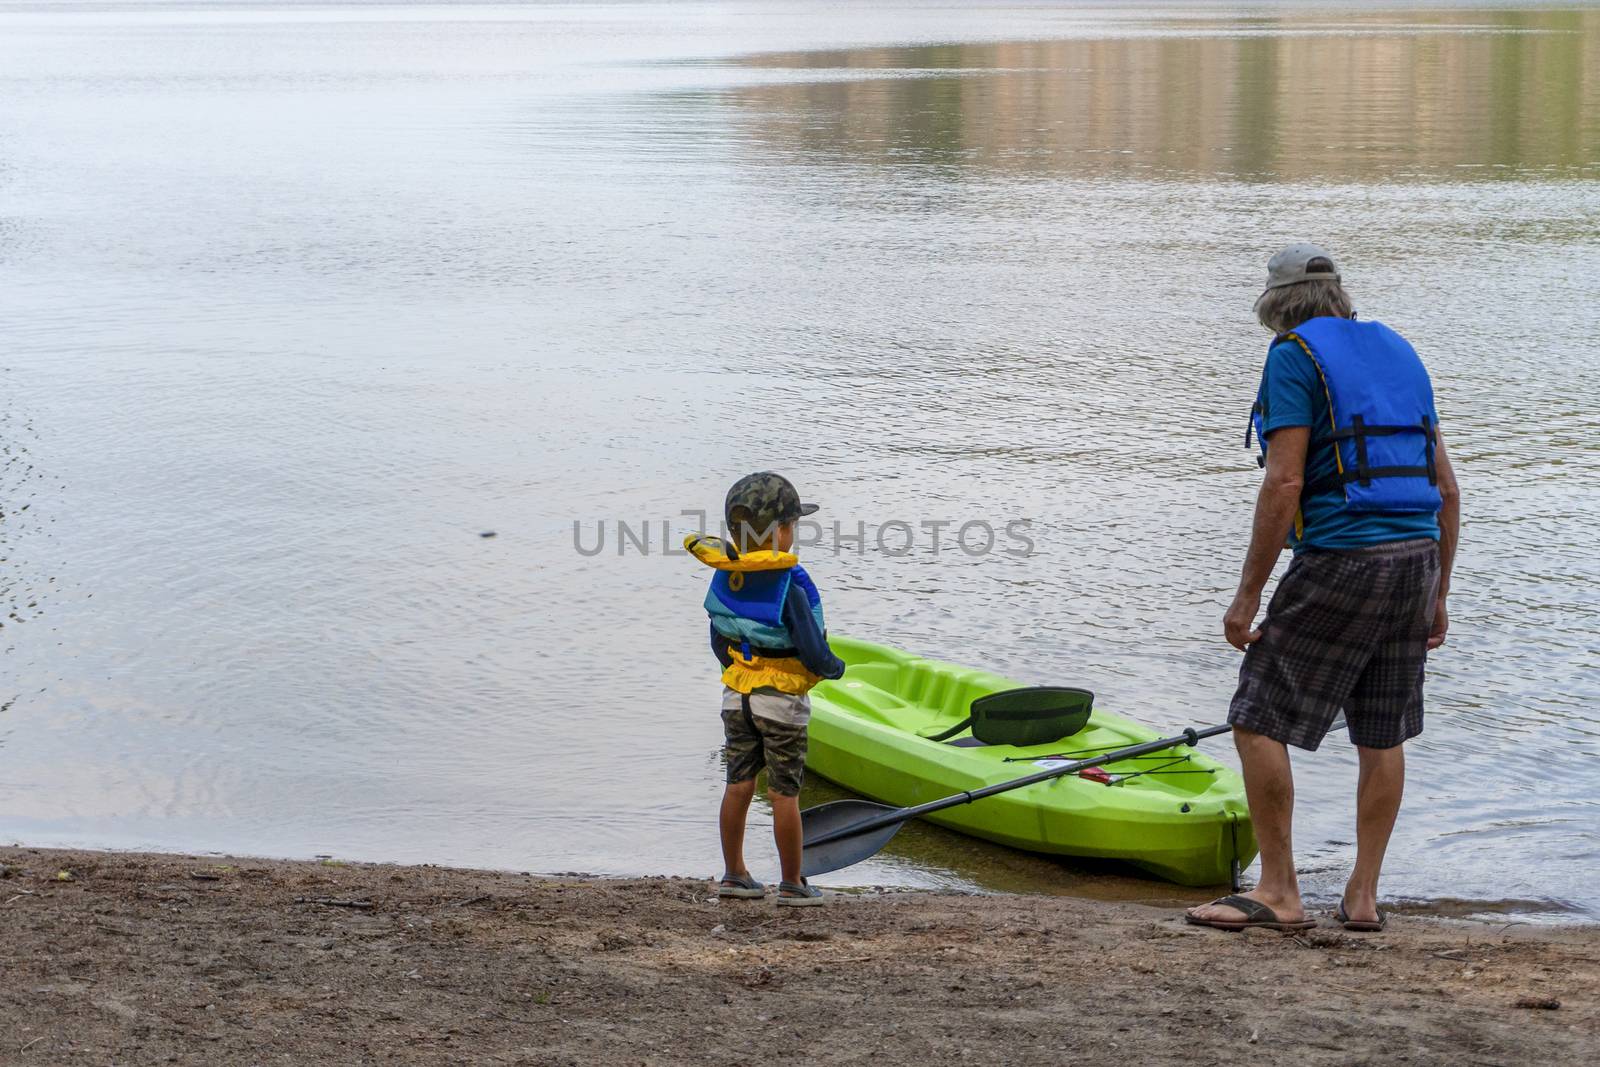 Before getting into the boat, the grandfather explains to his grandson how he should behave while sailing in a kayak